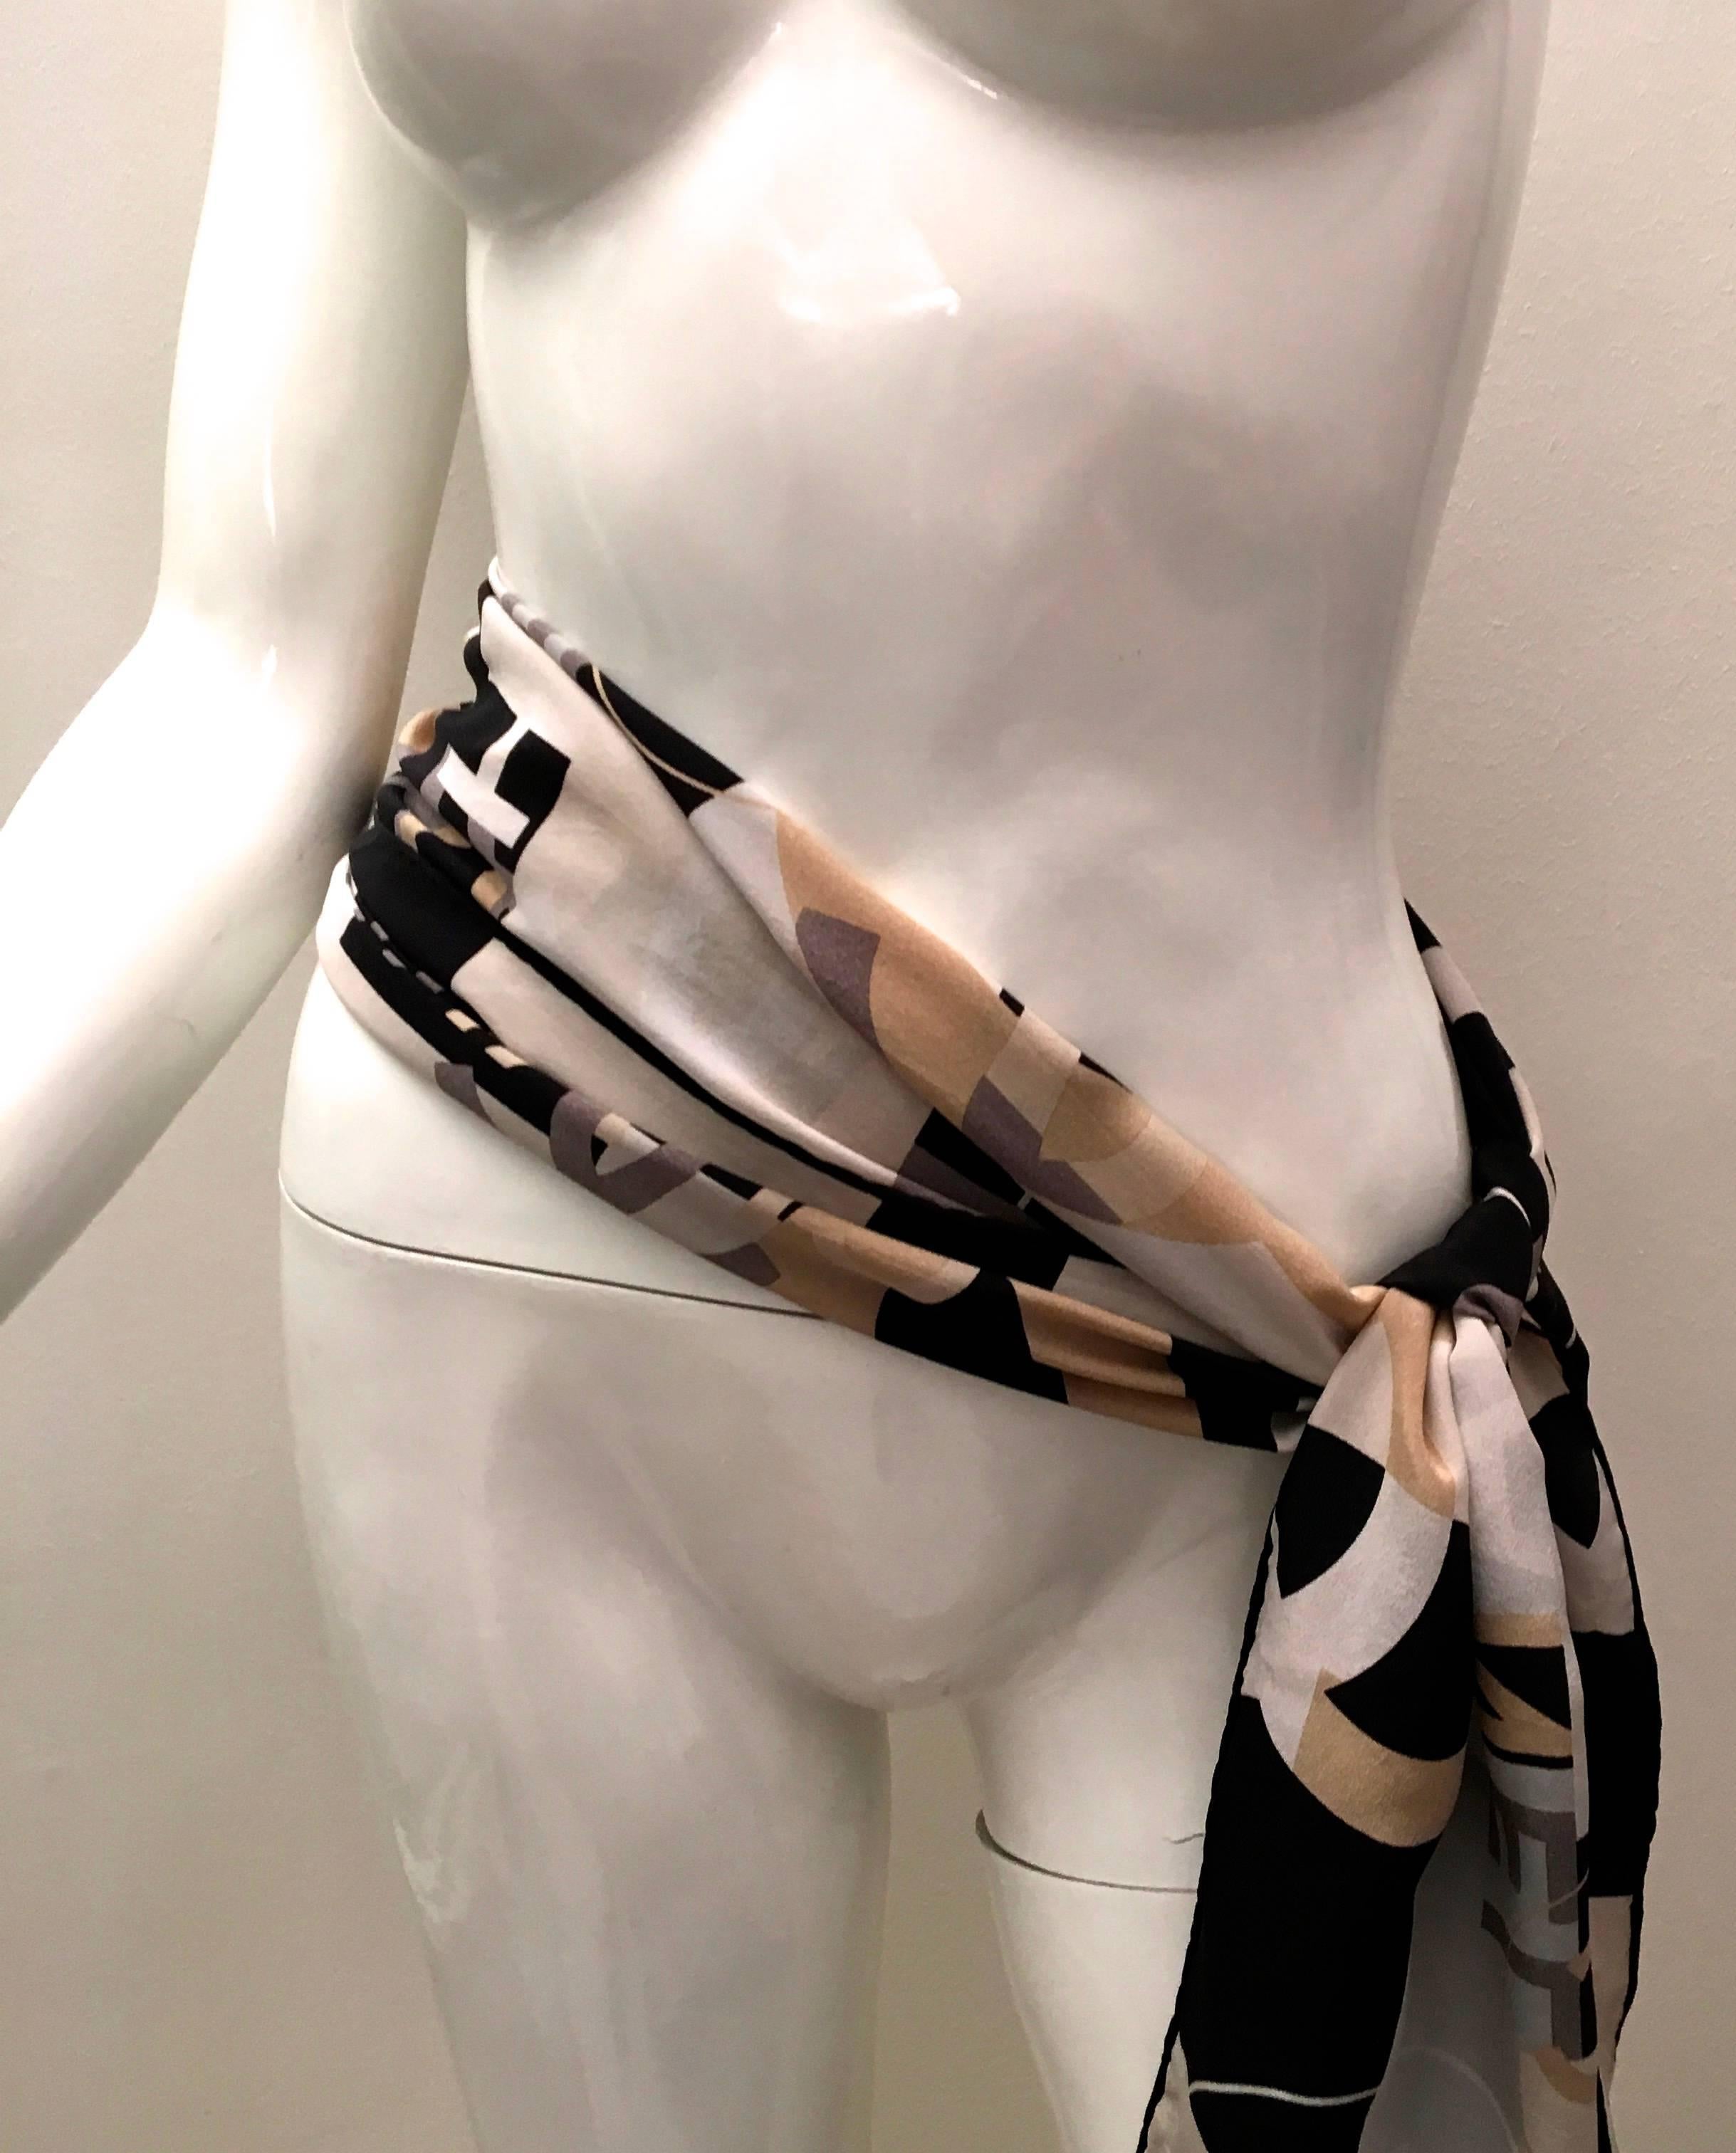 Presented here is a fabulous scarf from Chanel. This gorgeous scarf is made from soft 100% silk material and is hand-rolled. The scarf’s design is an abstract arrangement of the Chanel name and iconic CC emblem in a series of colors of creamy white,